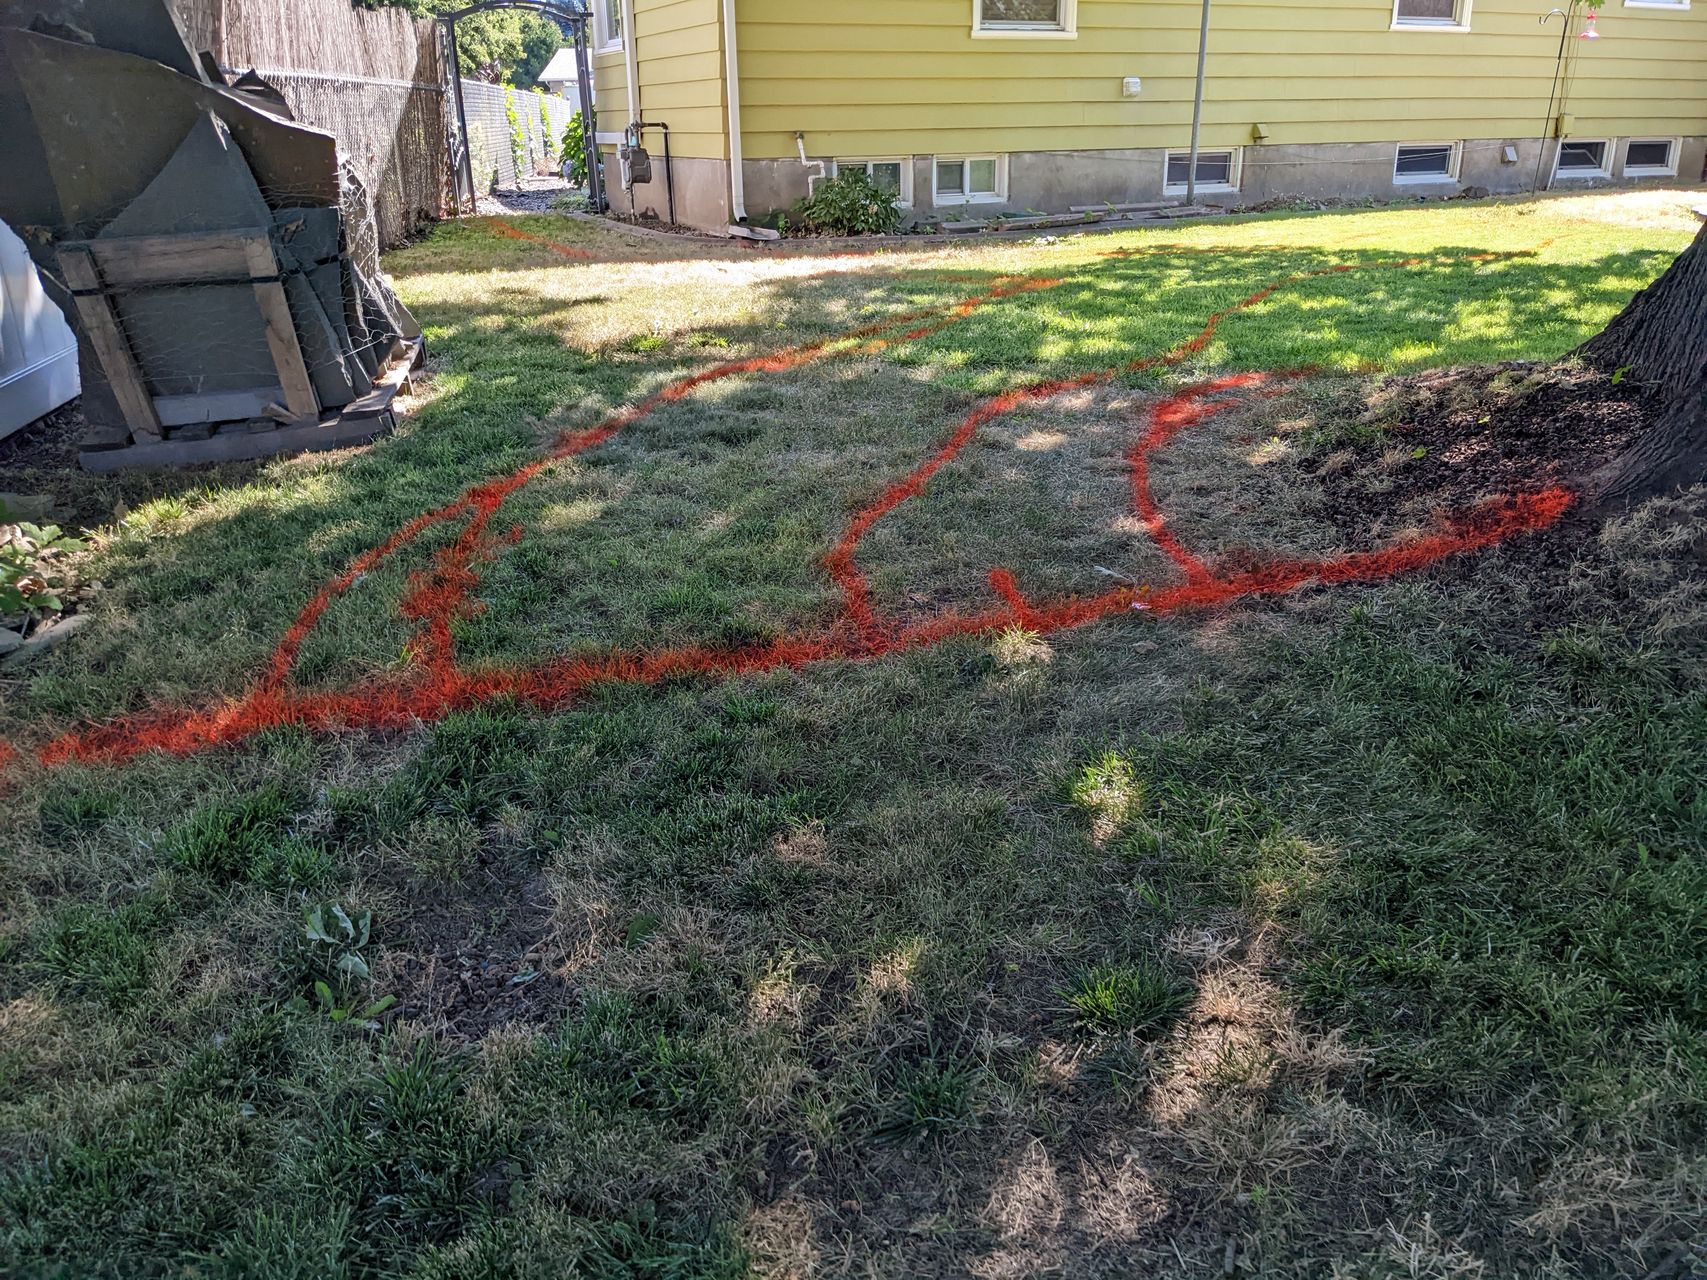 paint on the lawn showing where paths should go